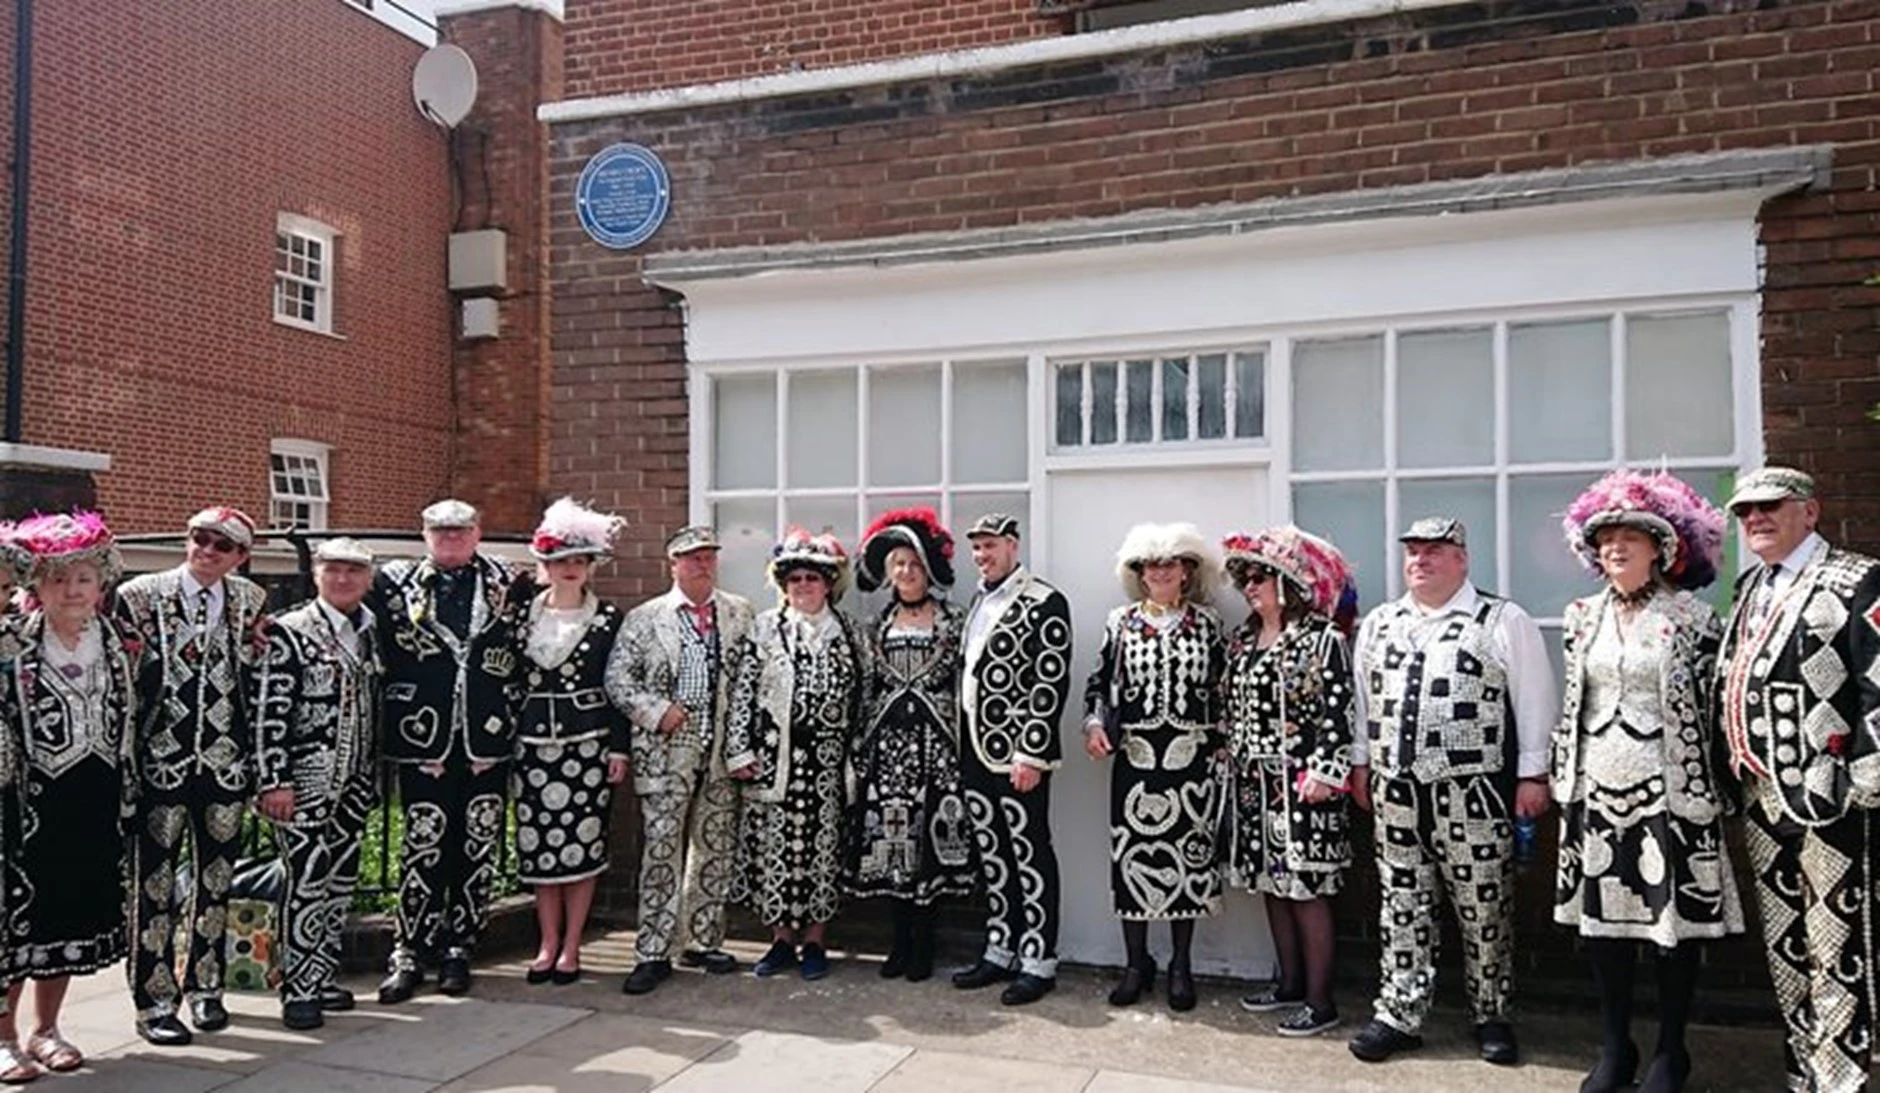 Remembering Henry Croft The Original Pearly King